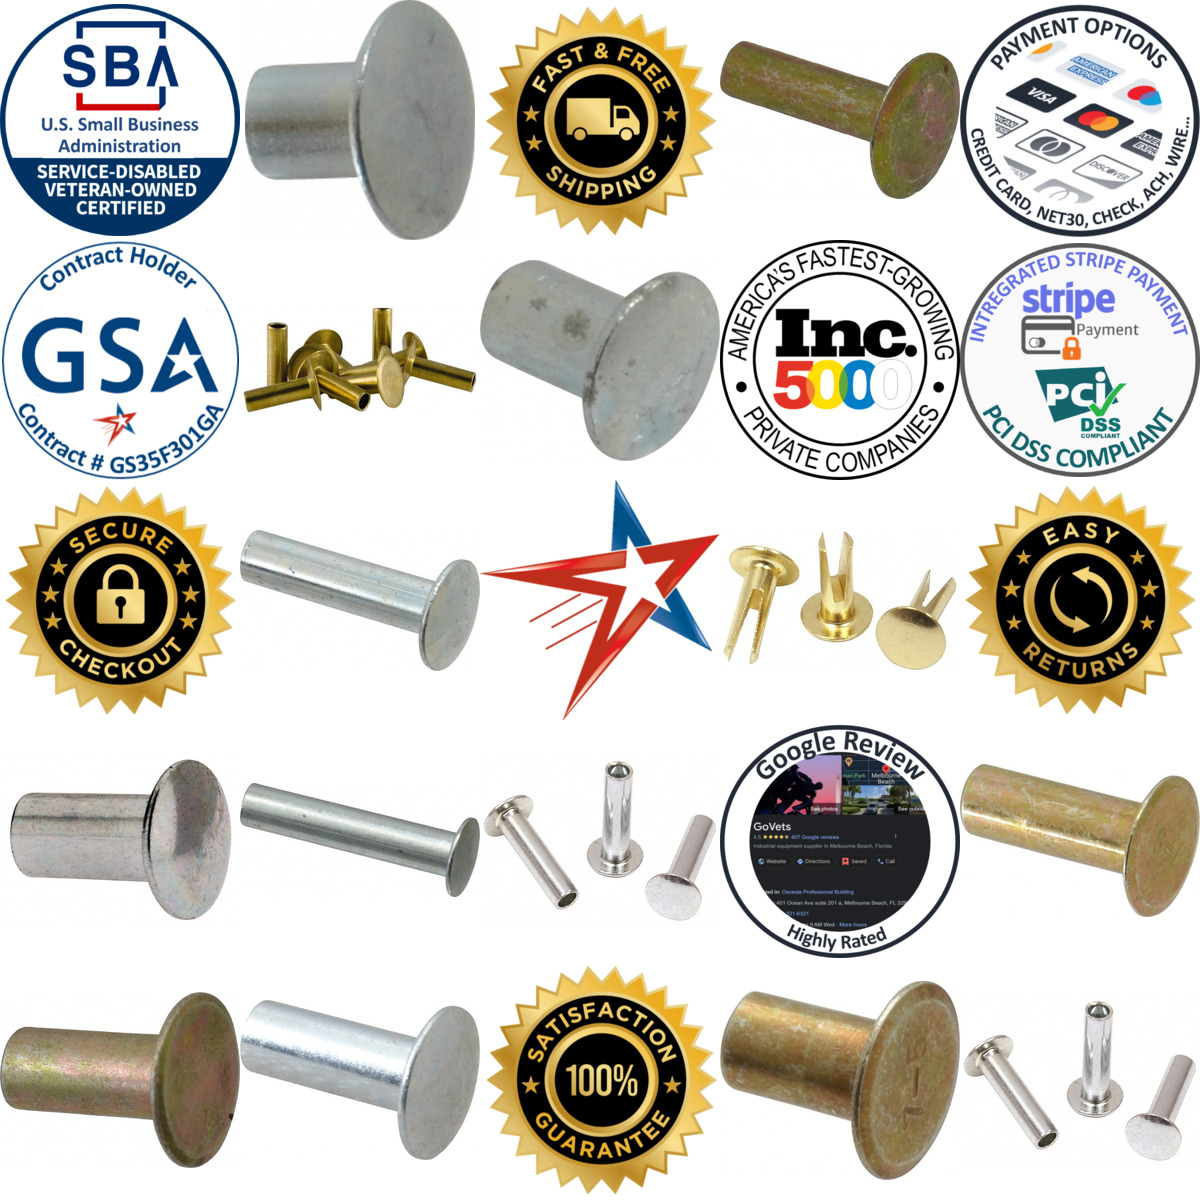 A selection of Semi Tubular and Split Rivets products on GoVets